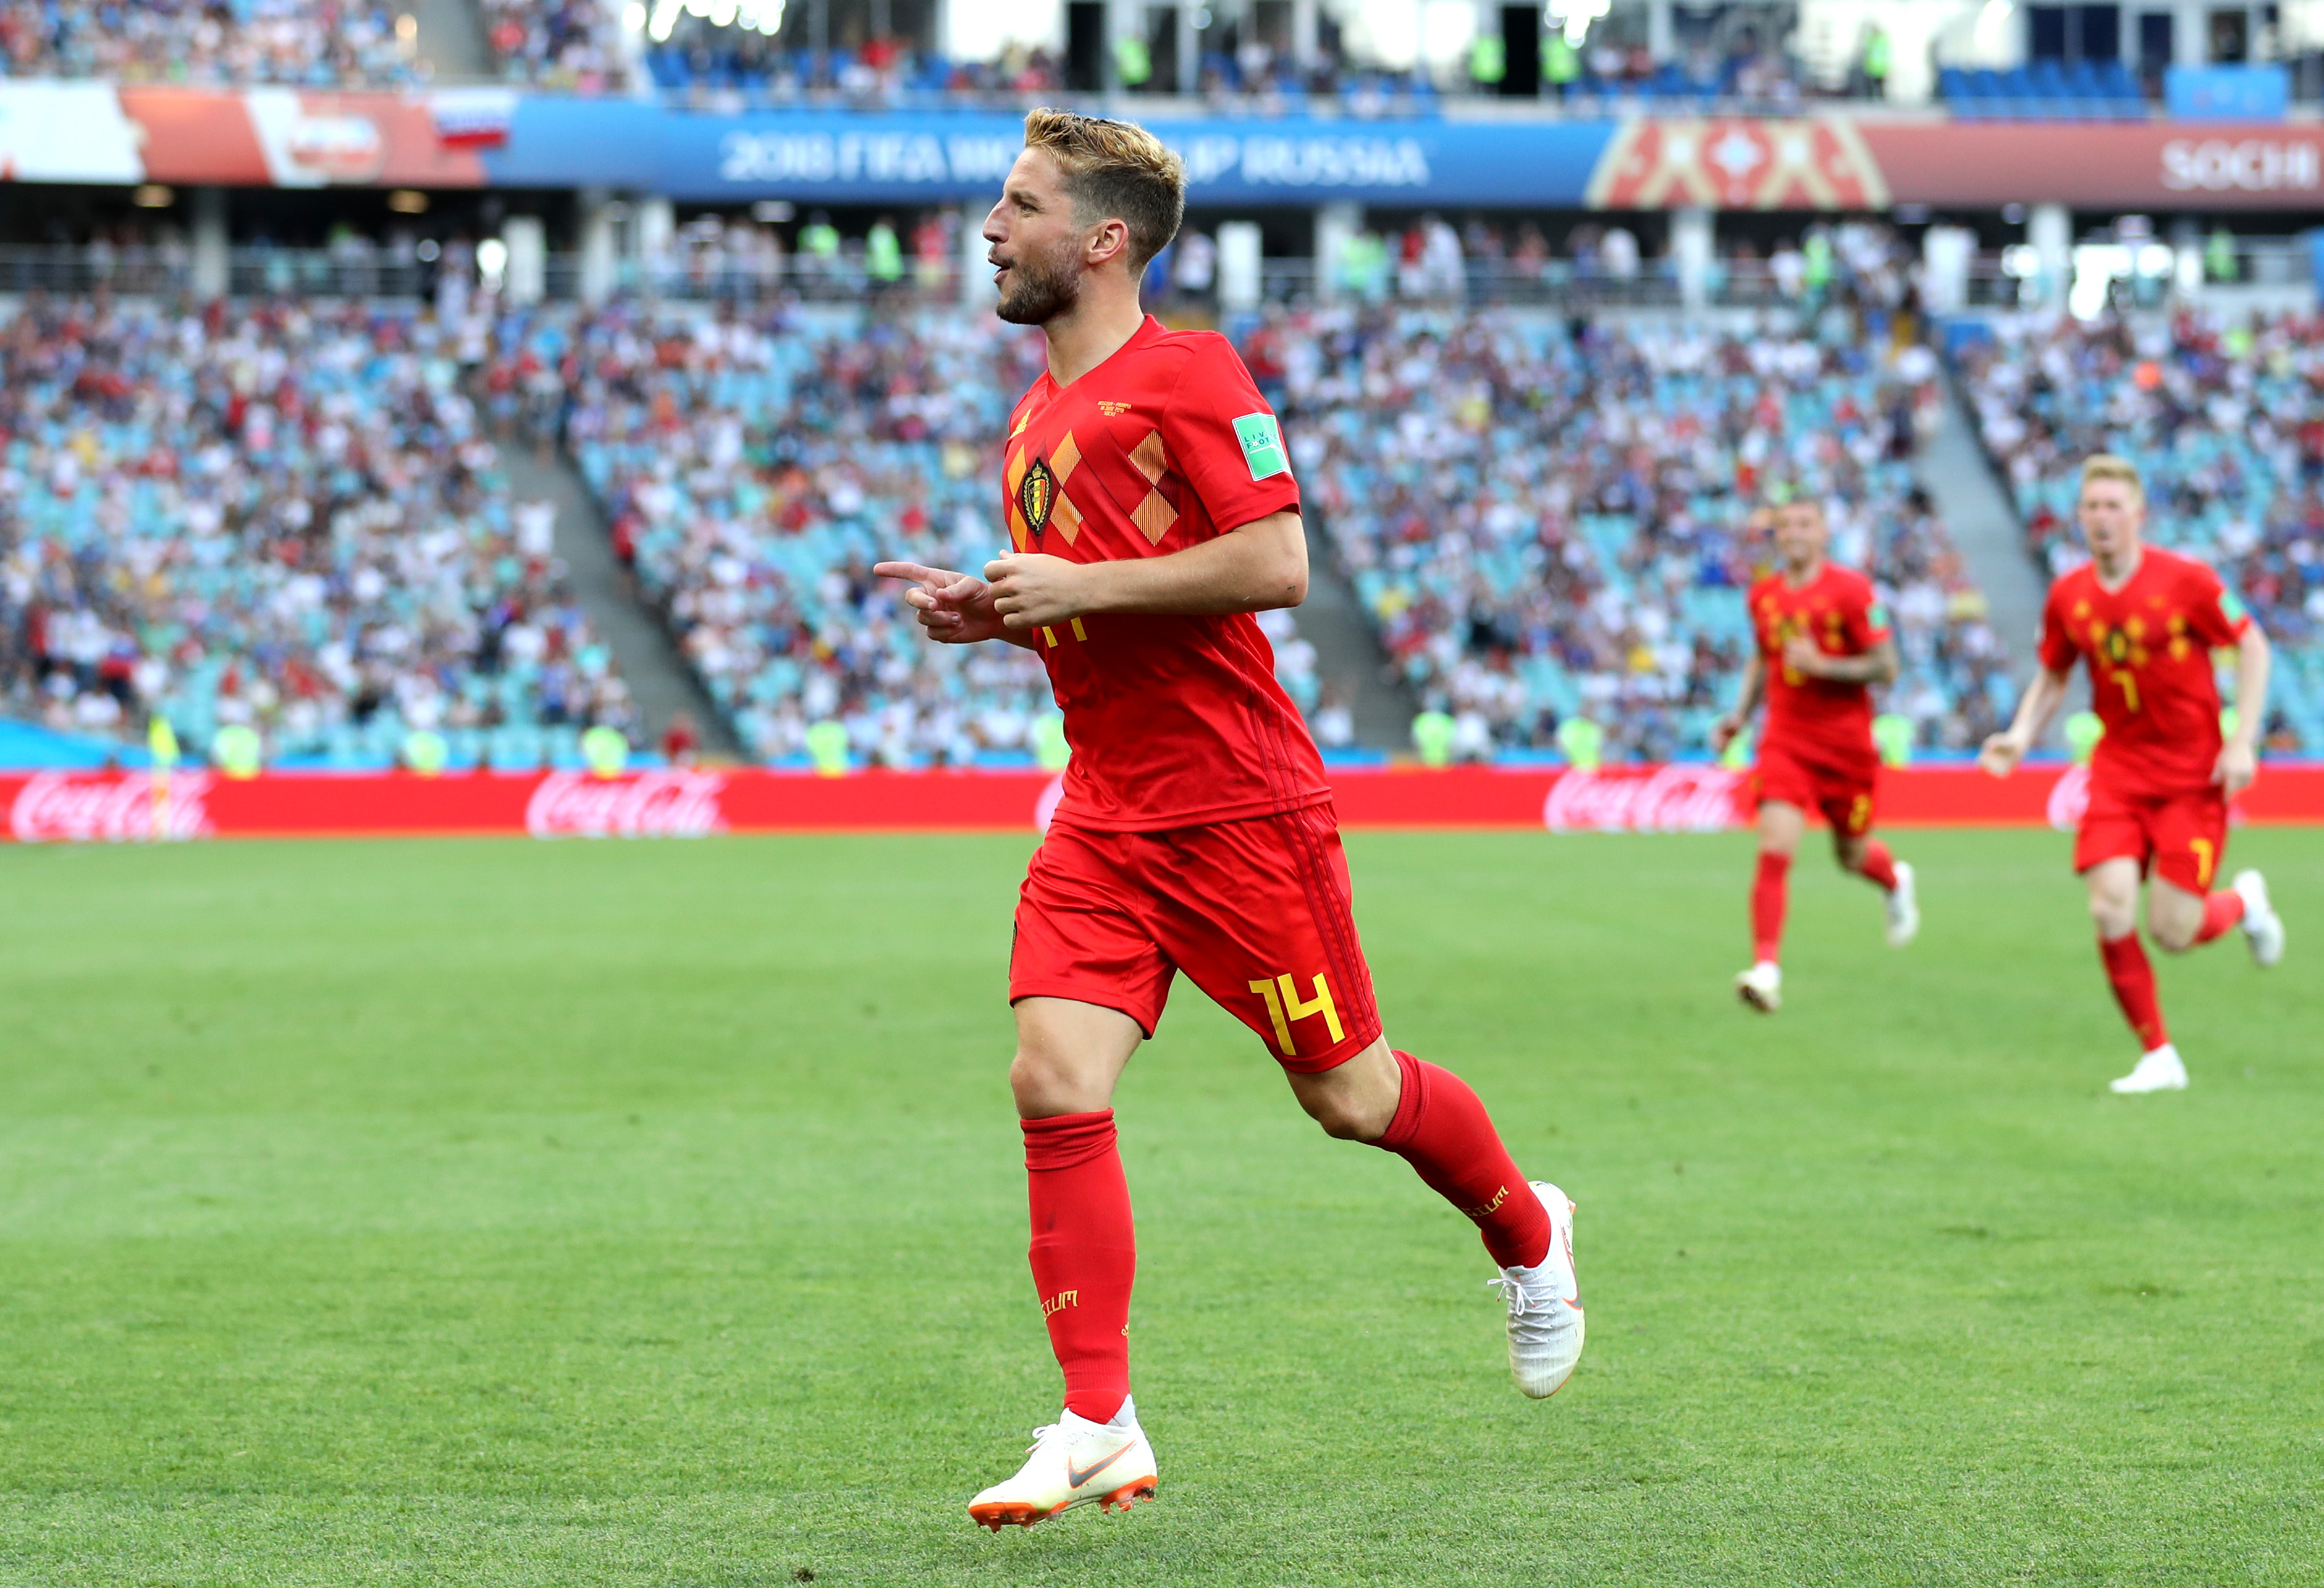 SOCHI, RUSSIA - JUNE 18:  Dries Mertens of Belgium celebrates after scoring his team's first goal during the 2018 FIFA World Cup Russia group G match between Belgium and Panama at Fisht Stadium on June 18, 2018 in Sochi, Russia.  (Photo by Richard Heathcote/Getty Images)